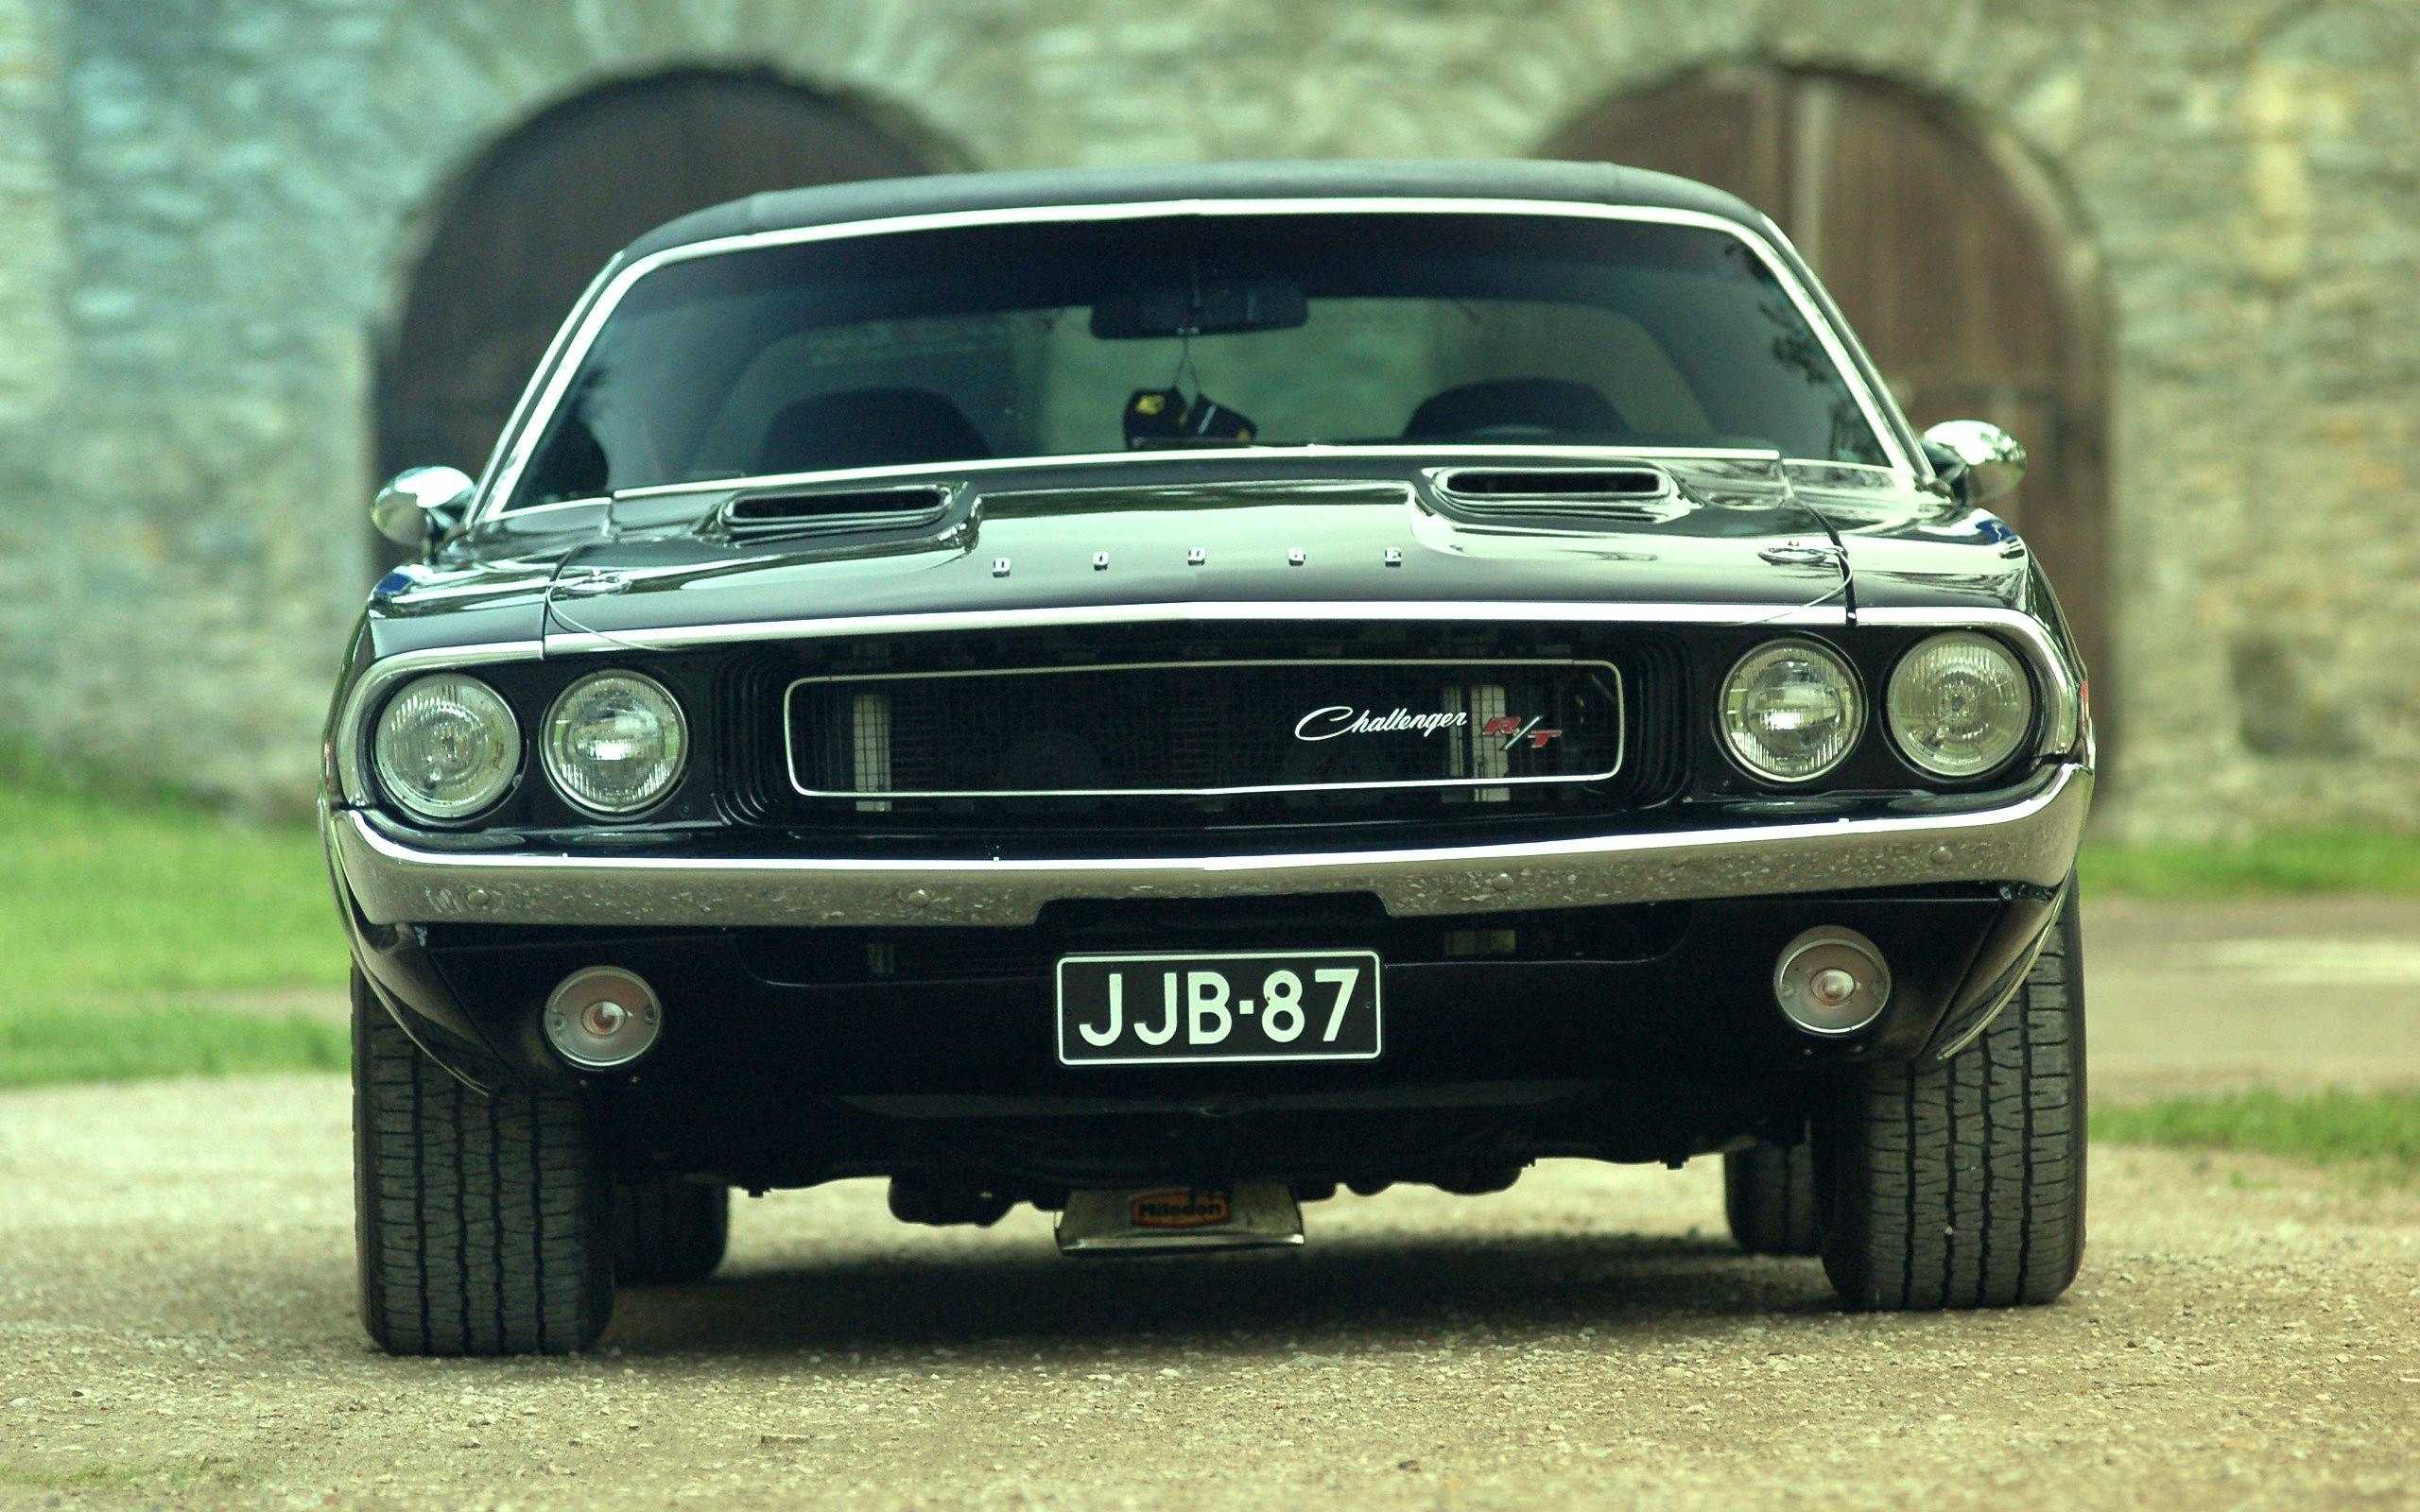 2560x1600 ... Classic 1970 Dodge Challenger Wallpaper by ROGUE-RATTLESNAKE